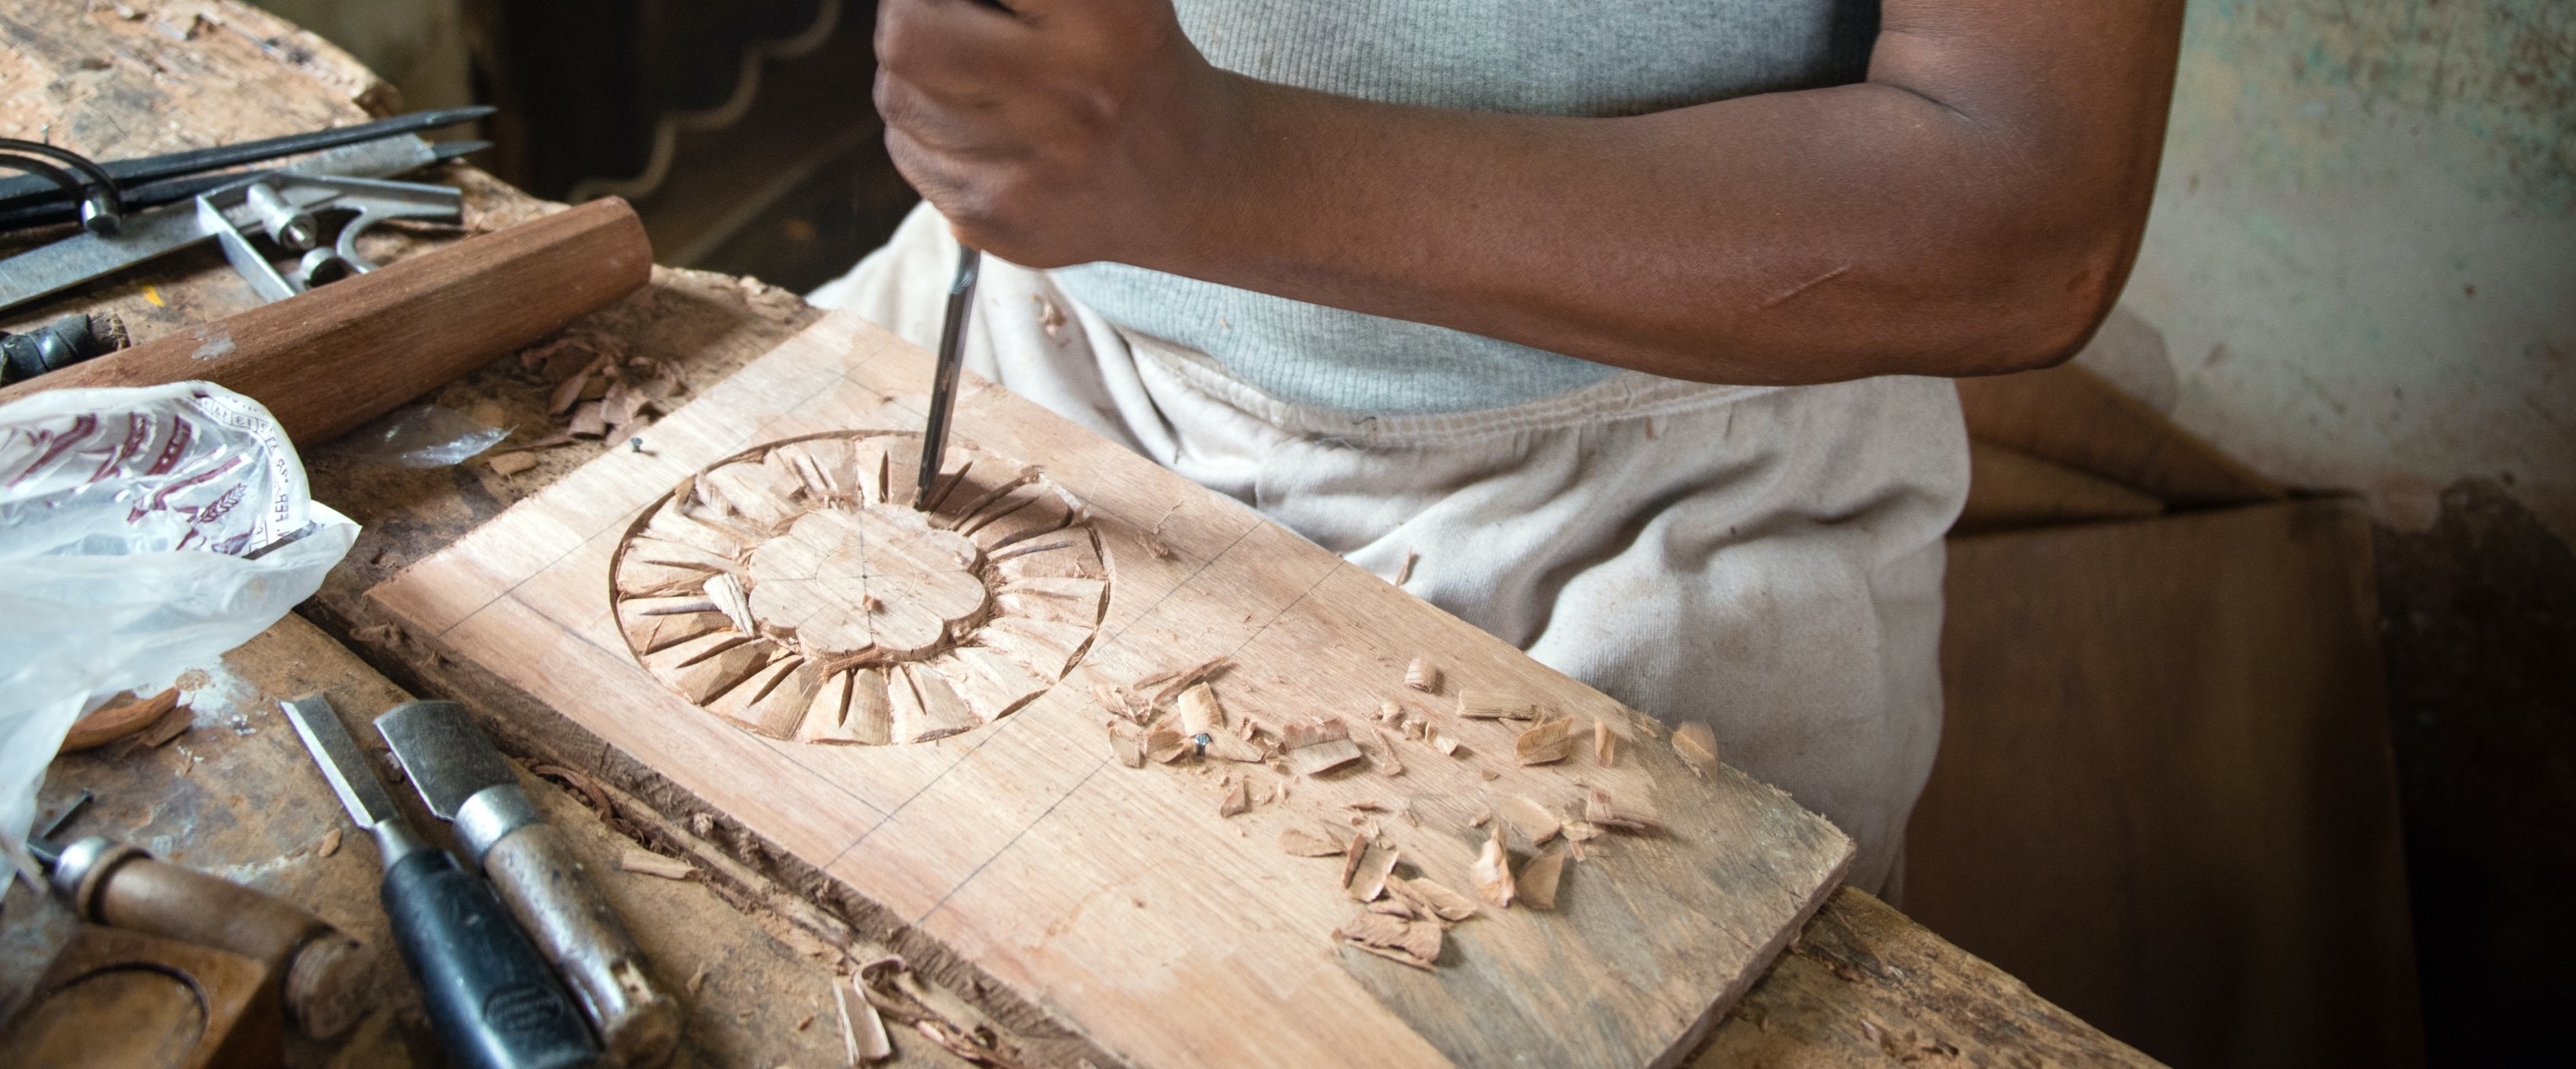 Woodwork at a Ghanaian SME